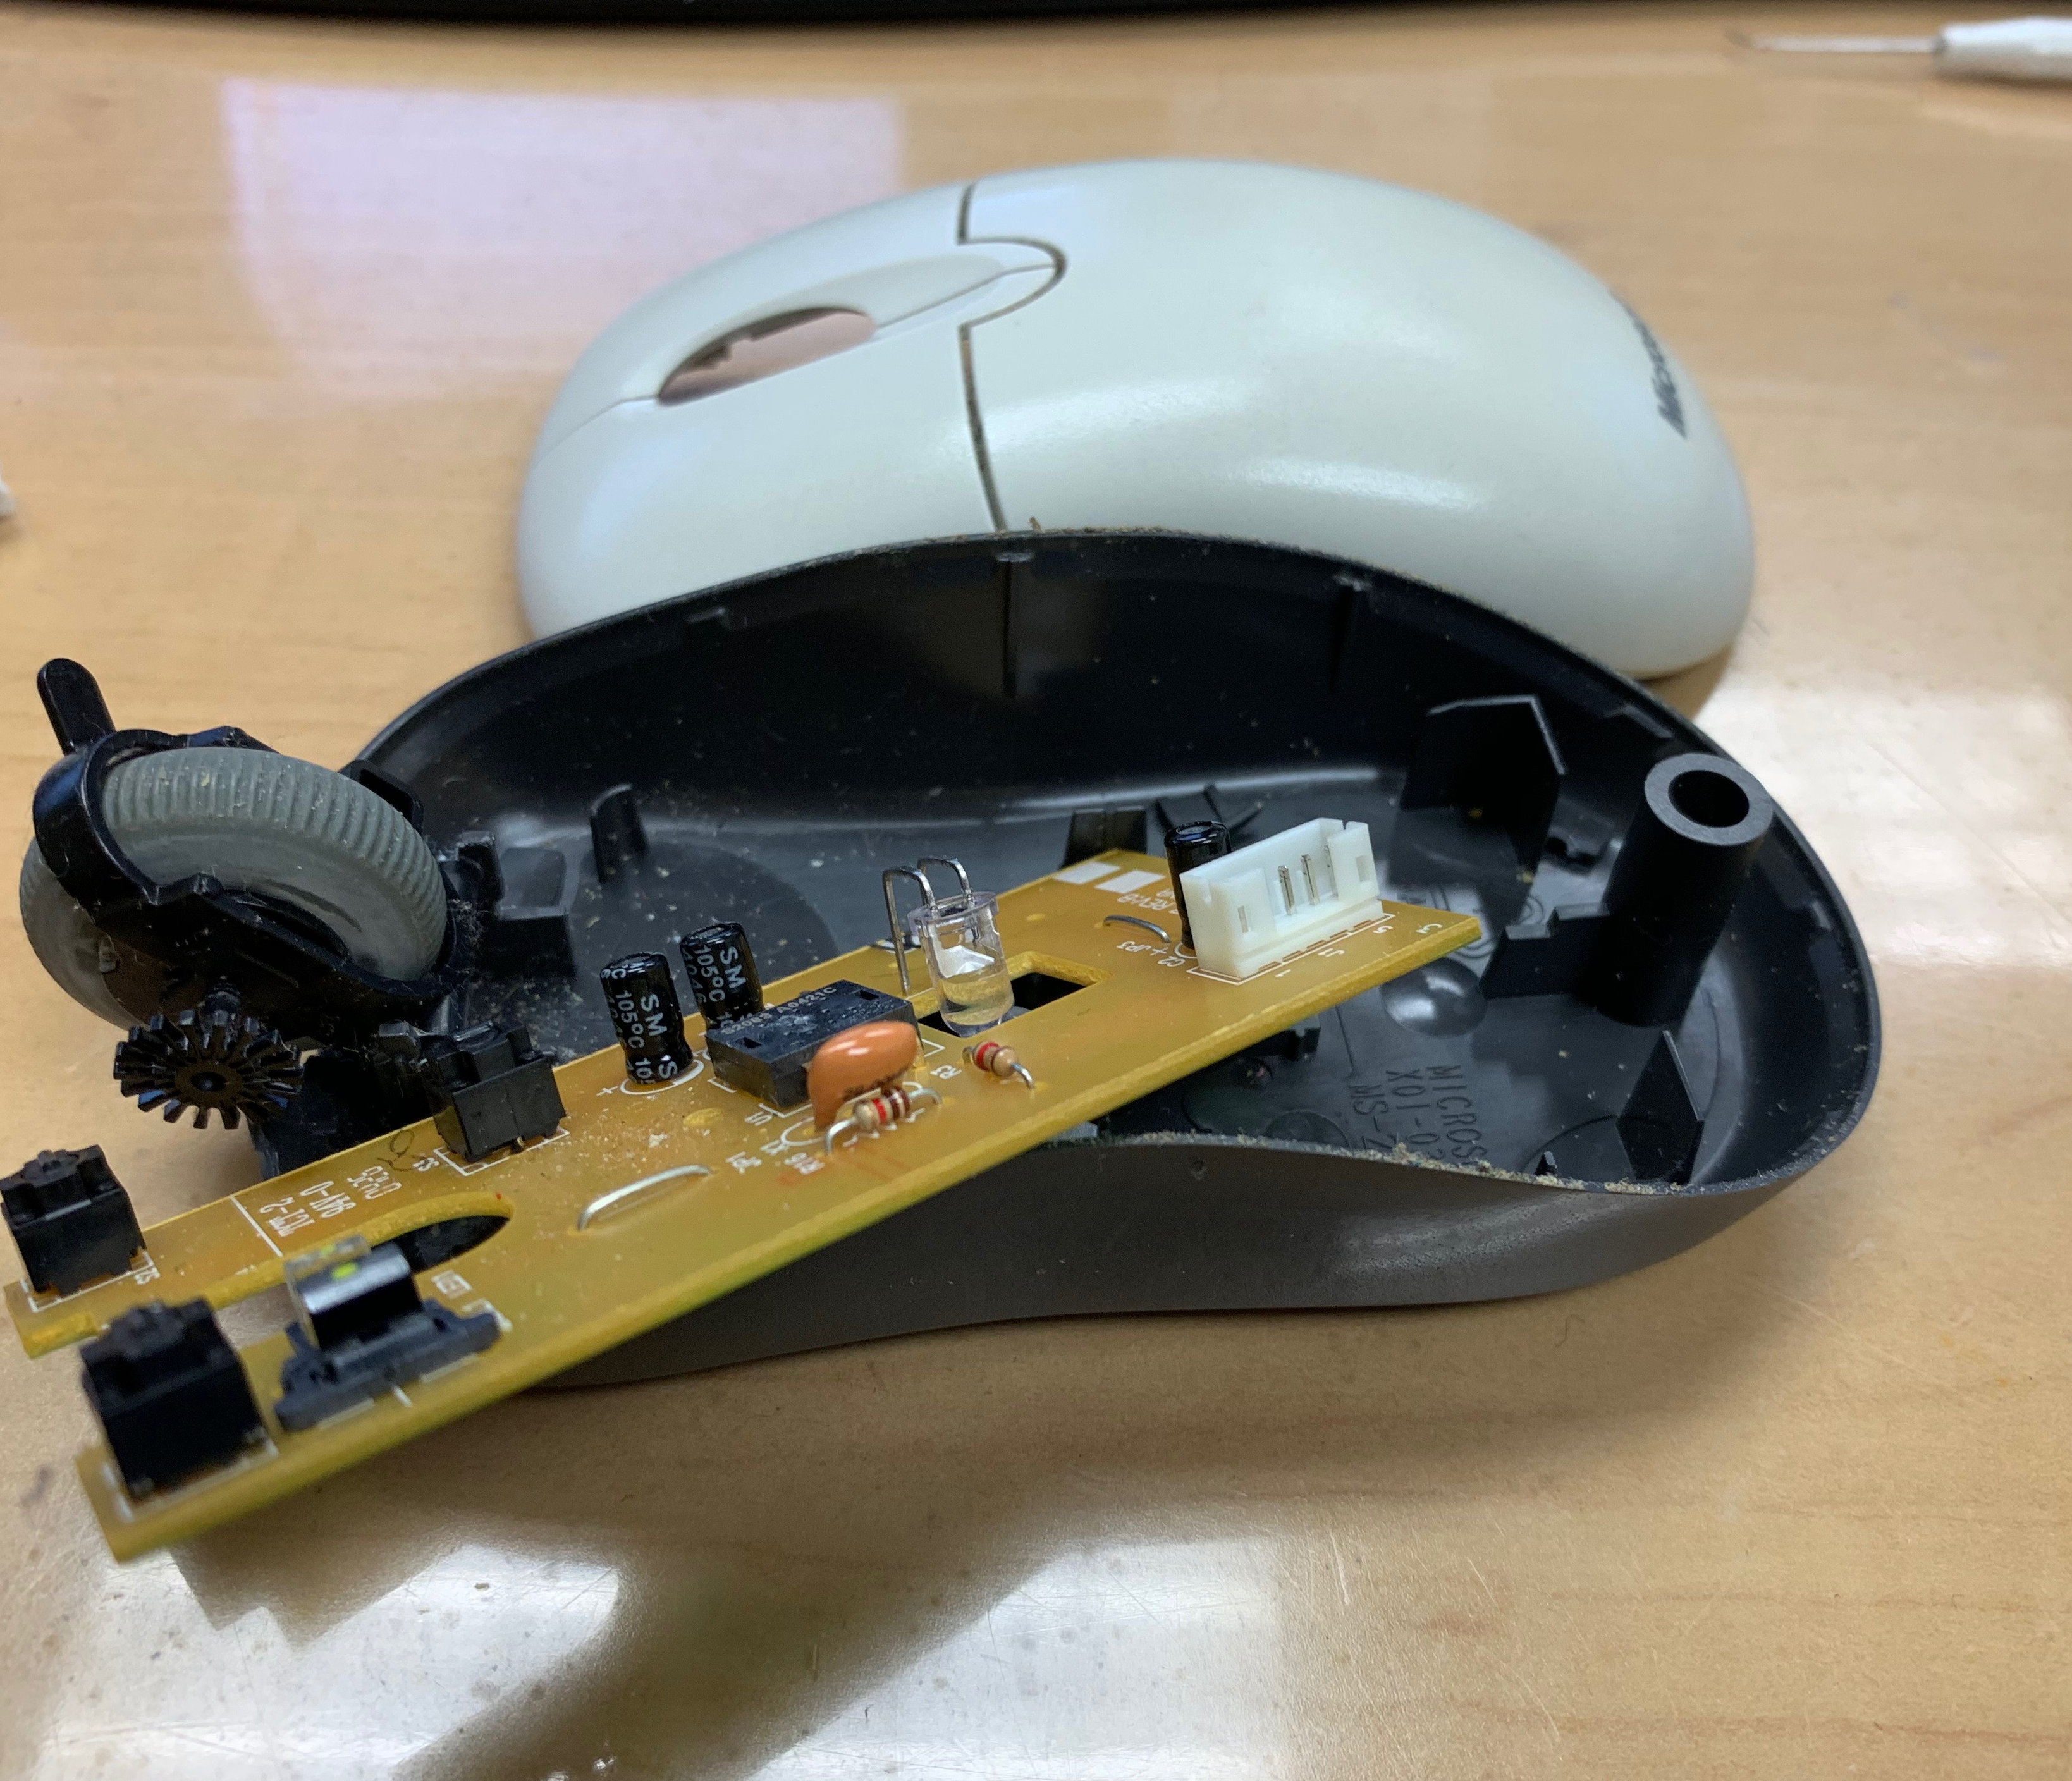 Repair A Mouse With Broken Cable - Webcommand.net